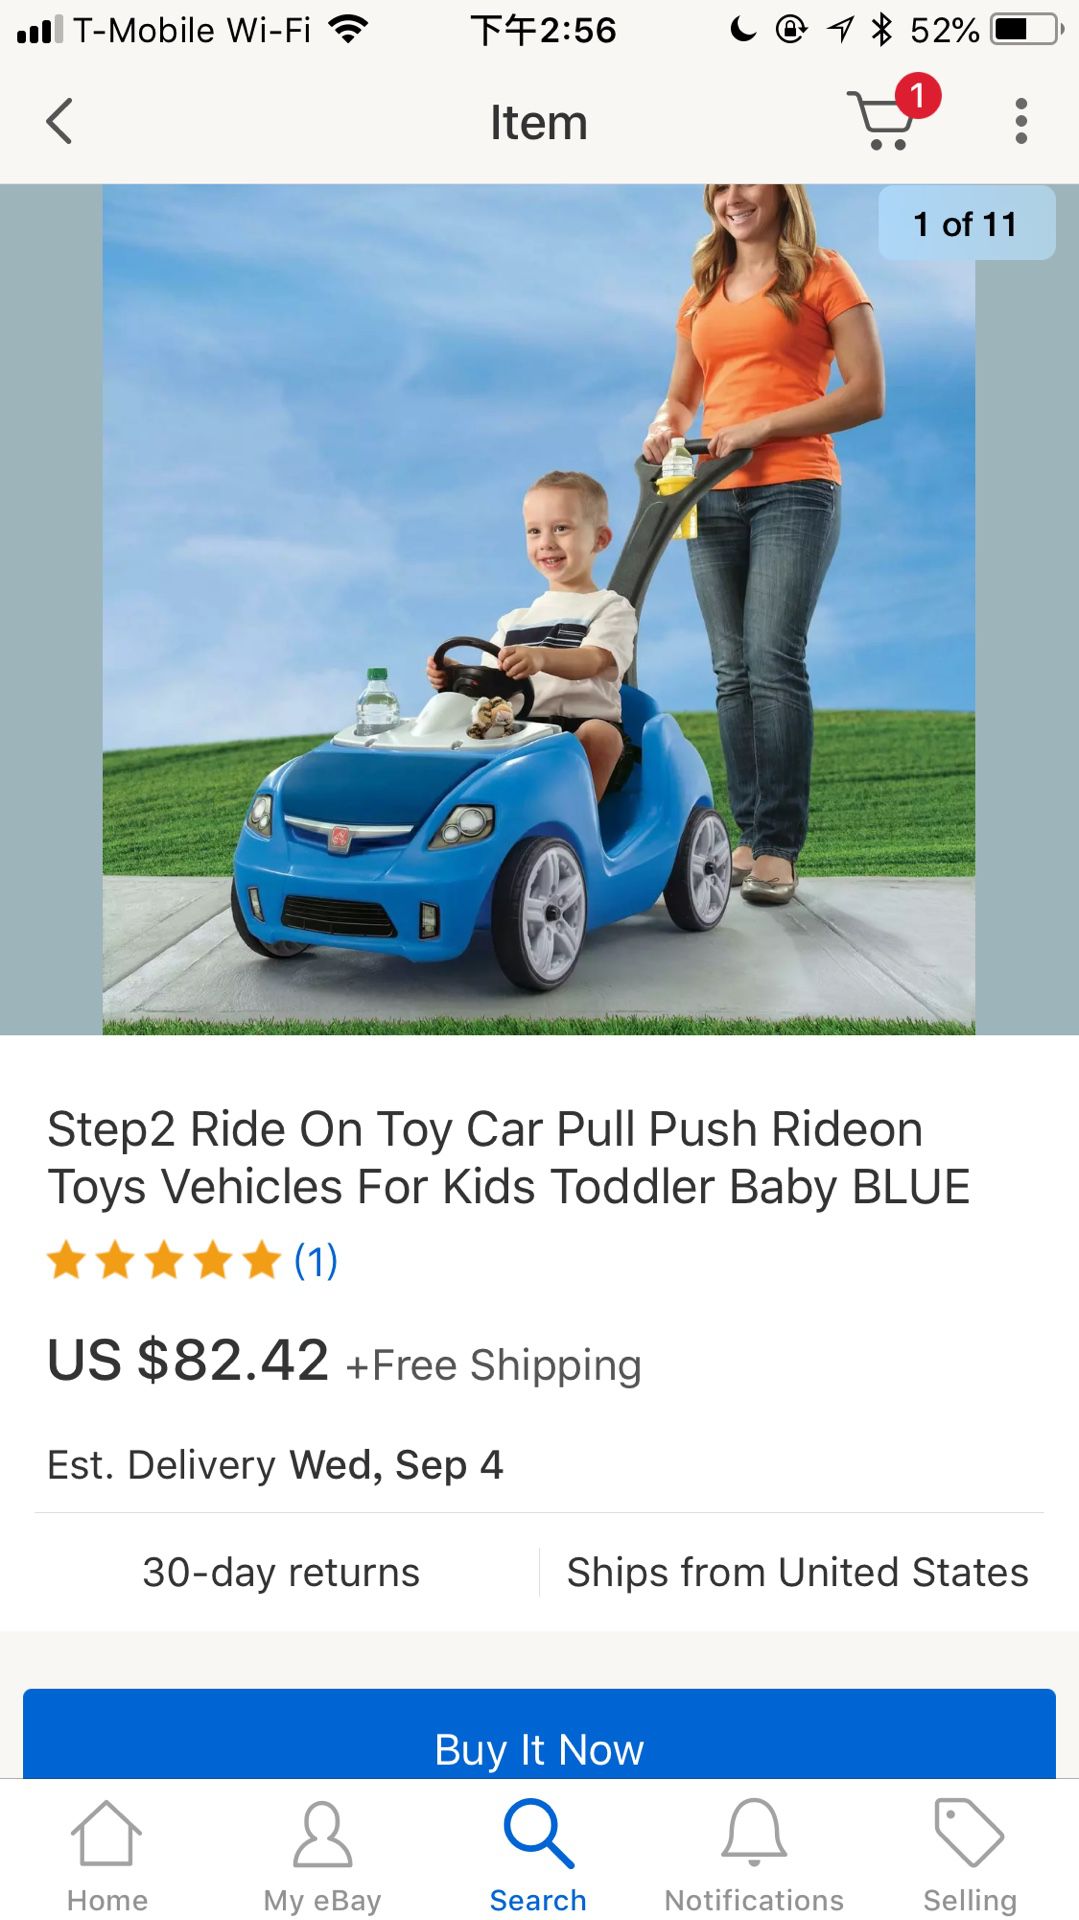 Step2 Ride On Toy Car Pull Push Rideon Toys Vehicles For Kids Toddler Baby BLUE